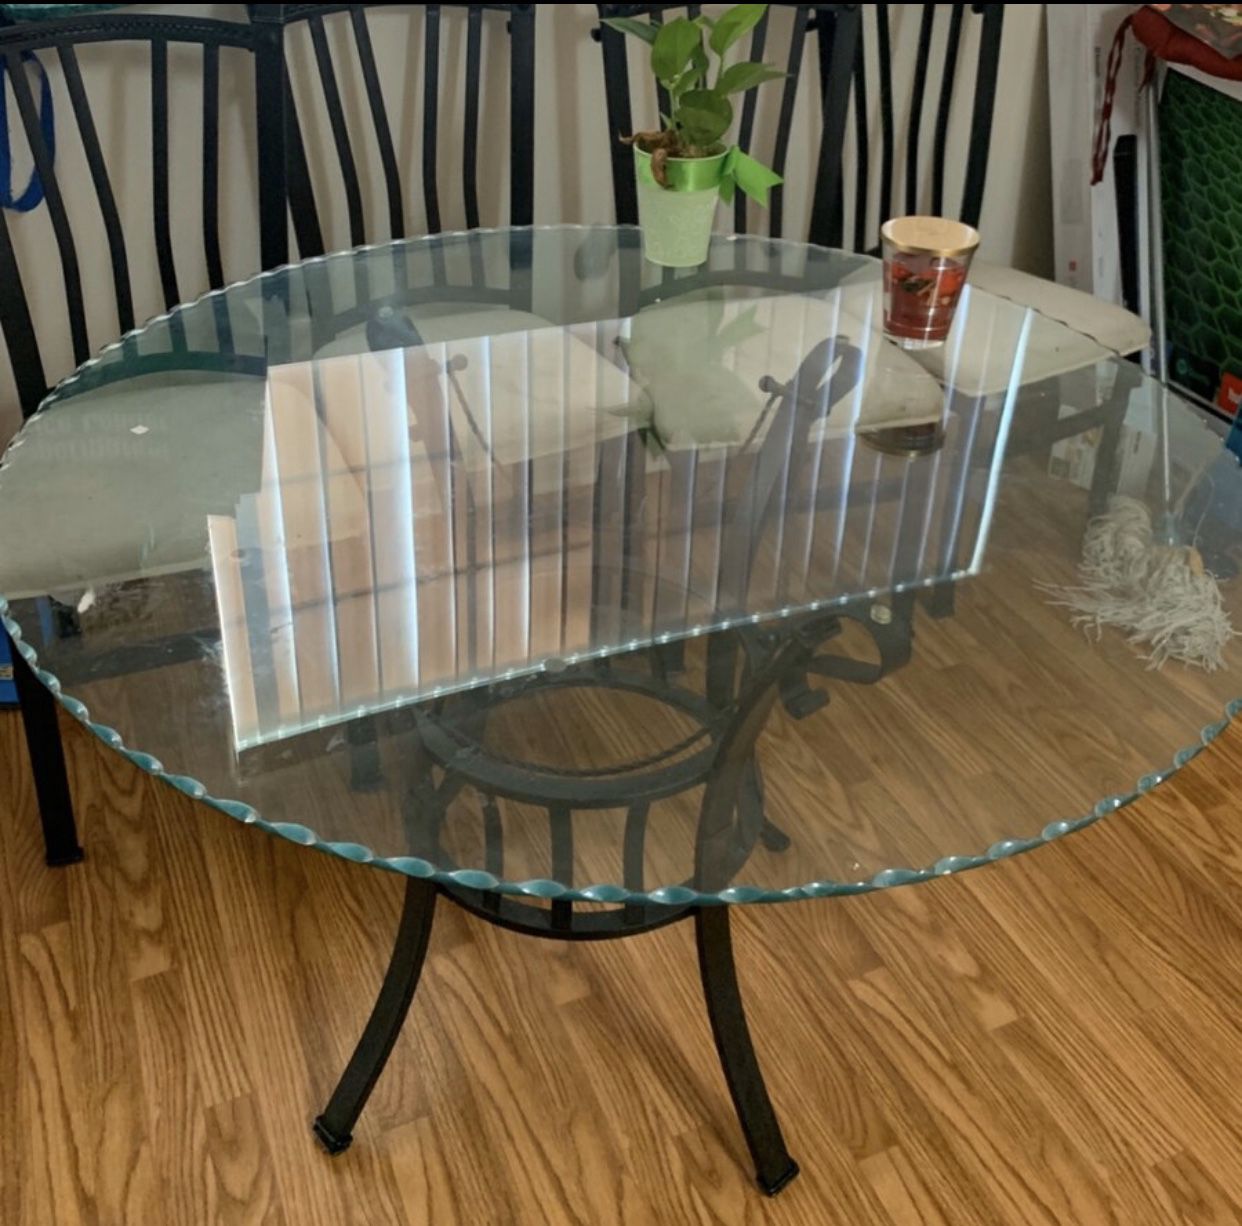 Glass top kitchen table $40